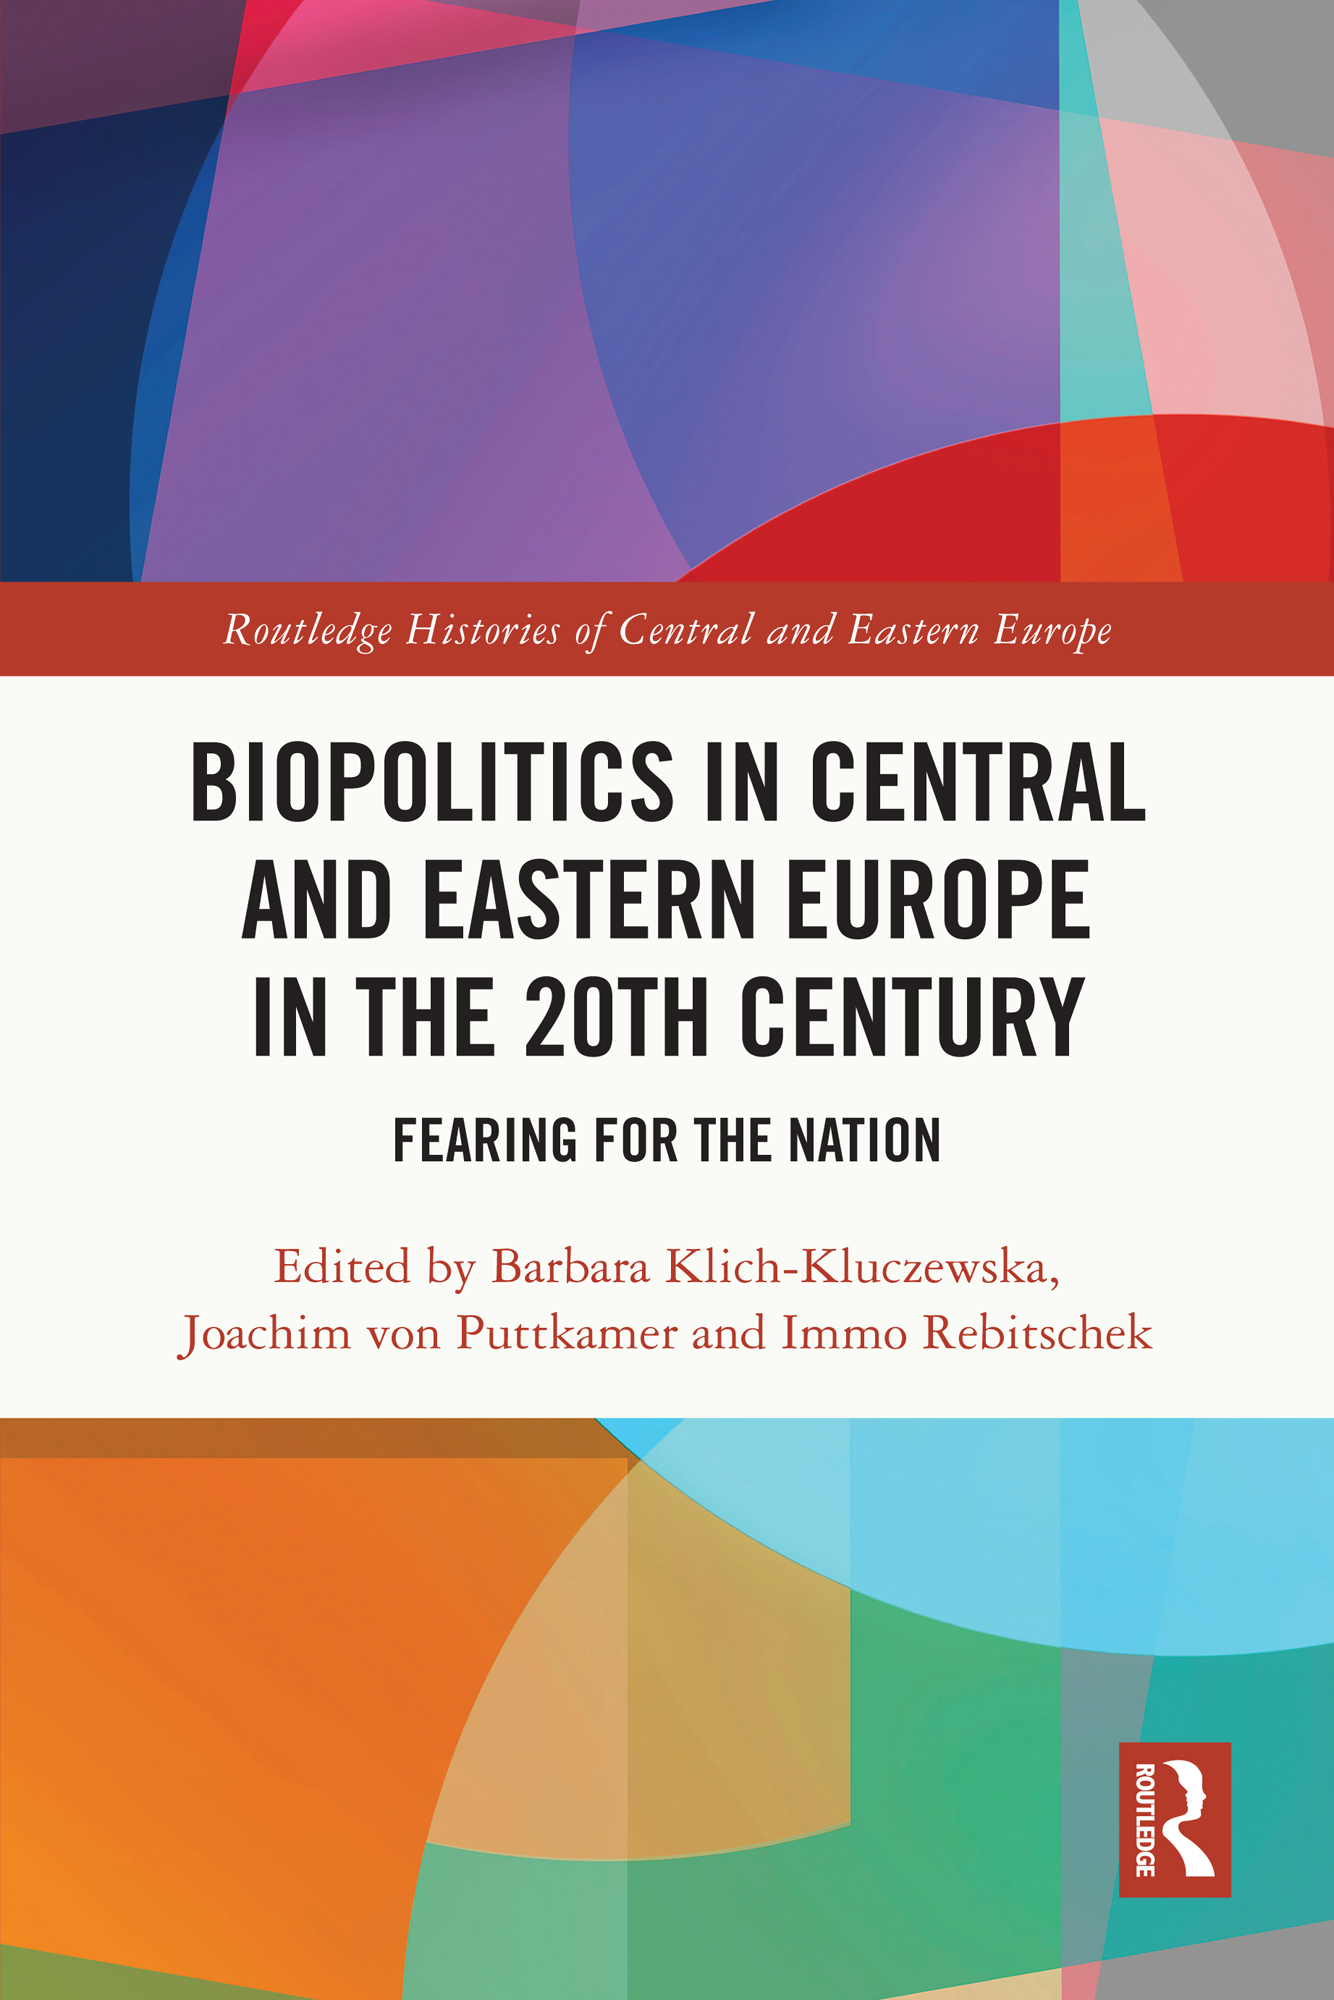 Biopolitics in Central and Eastern Europe in the 20th Century